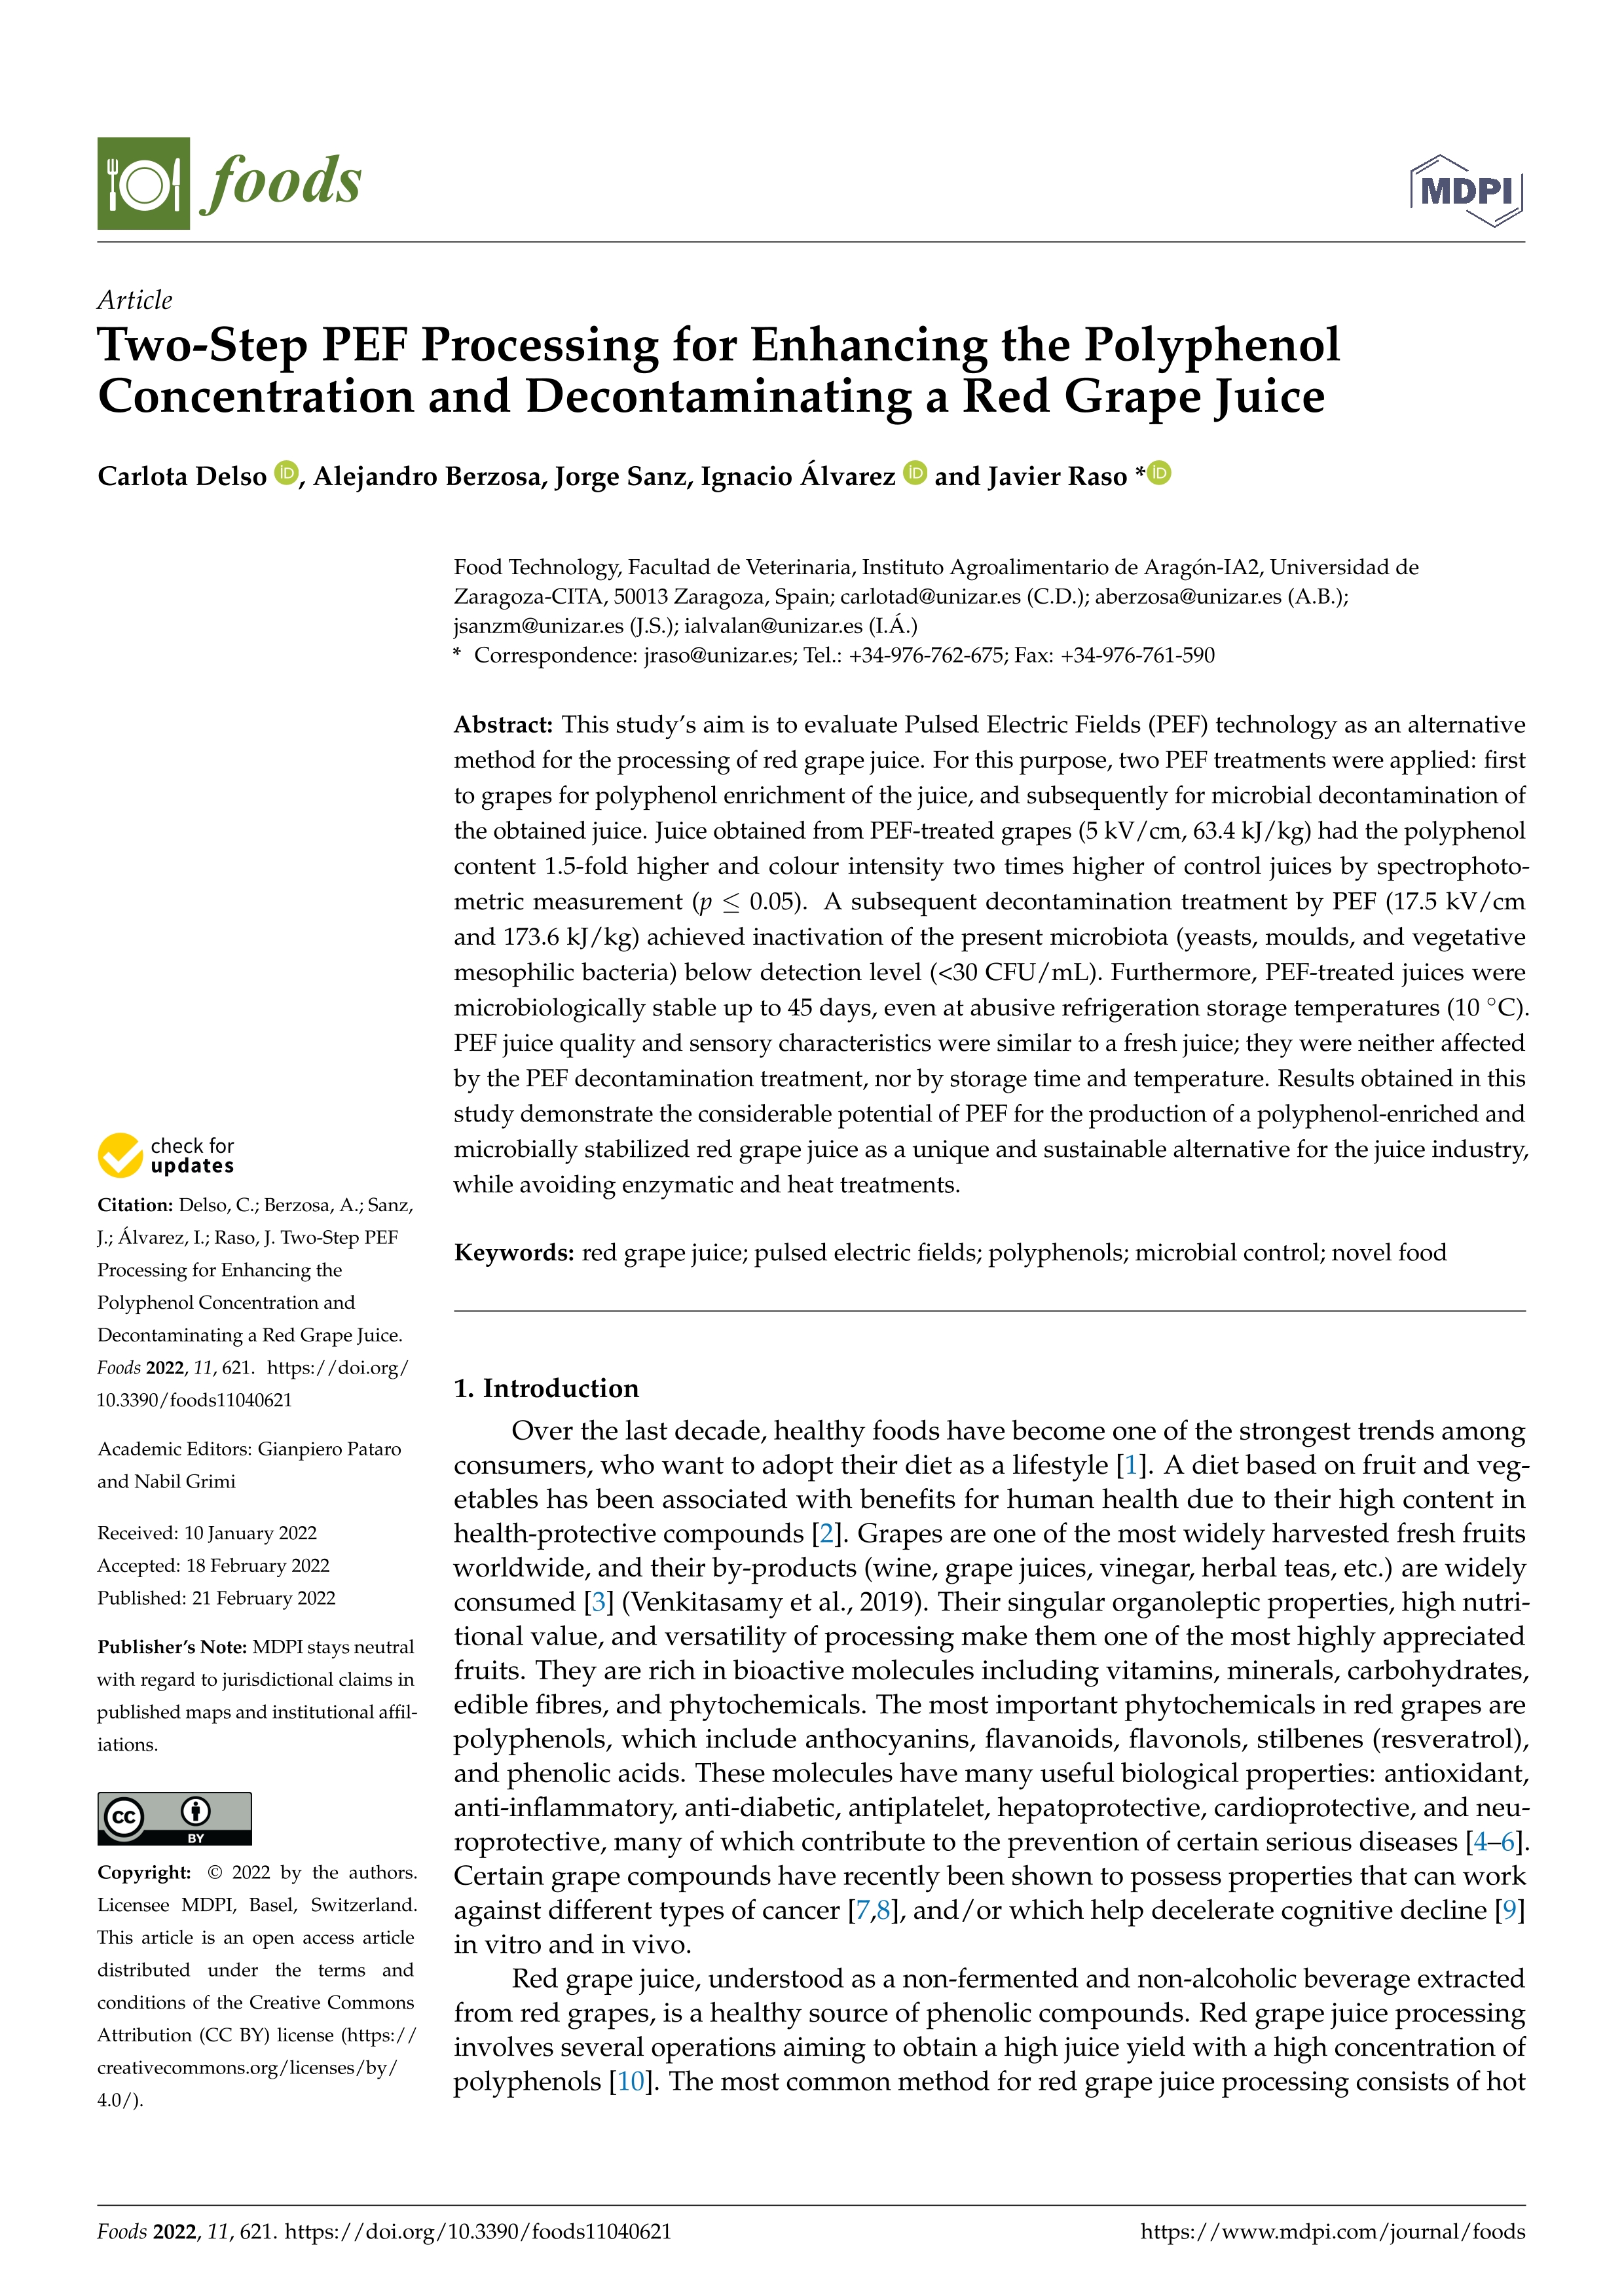 Two-step PEF processing for enhancing the polyphenol concentration and decontaminating a red grape juice